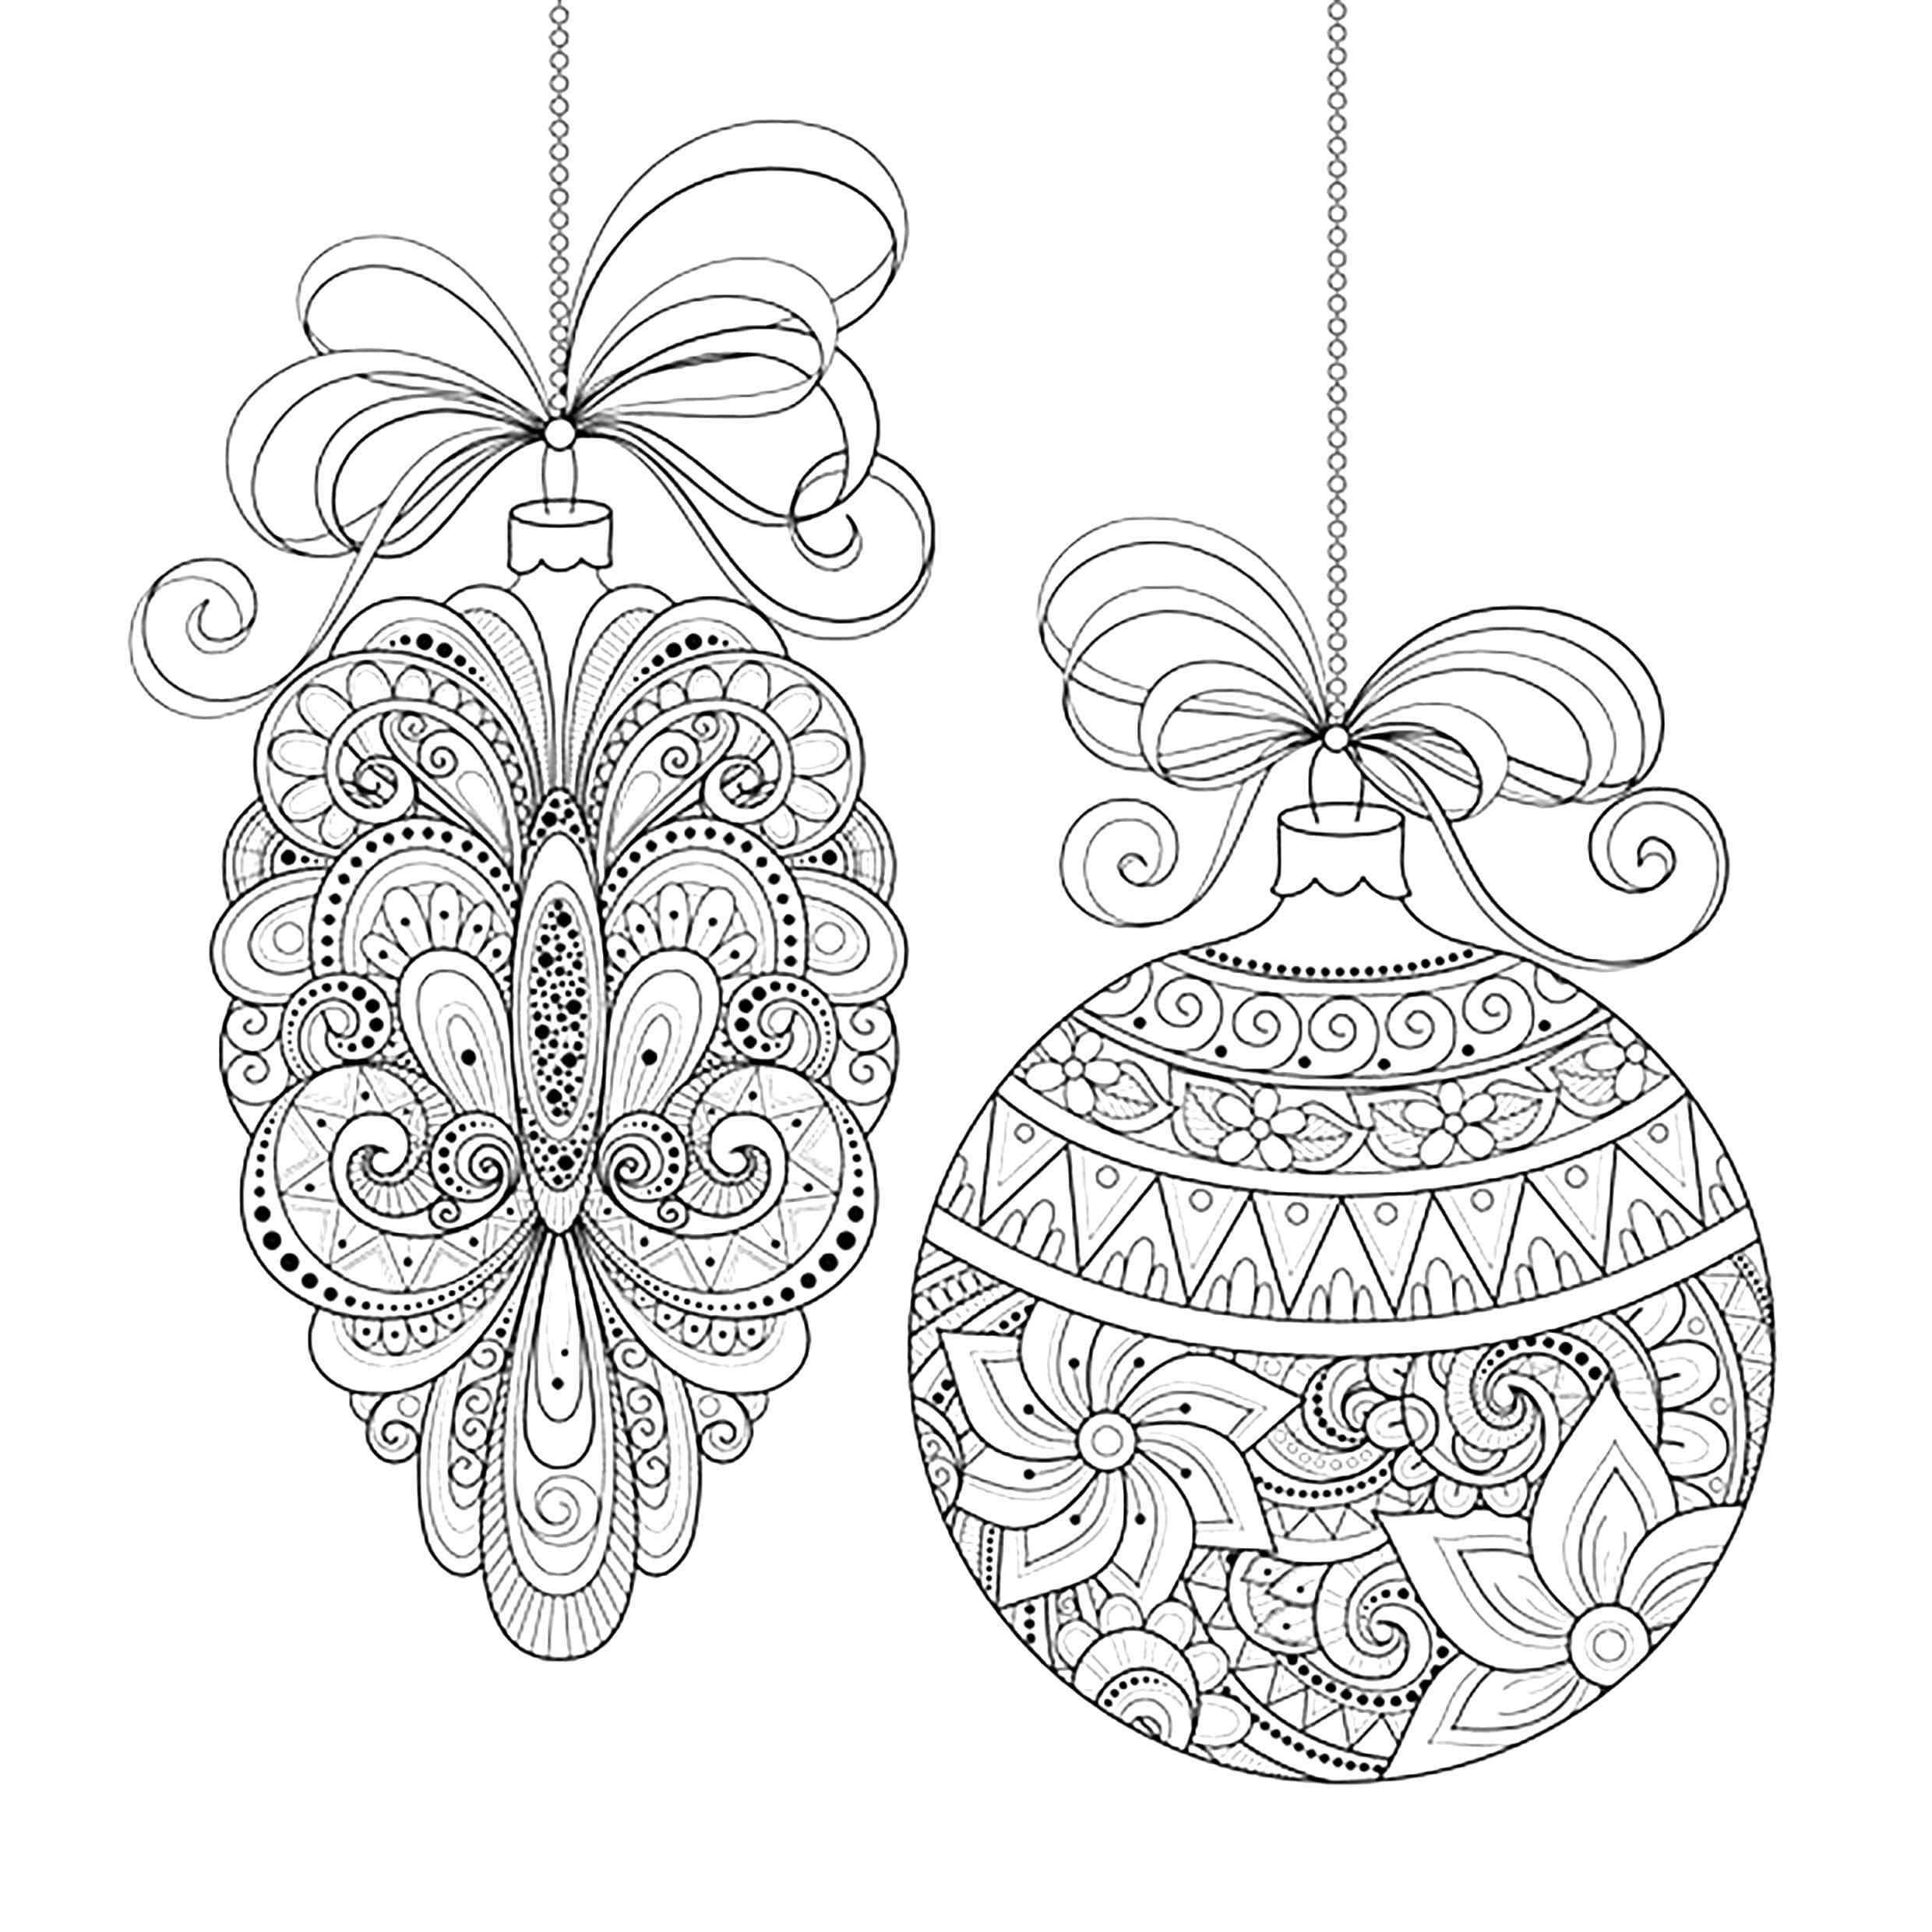 Ornament On Christmas Tree Decoration Coloring Page